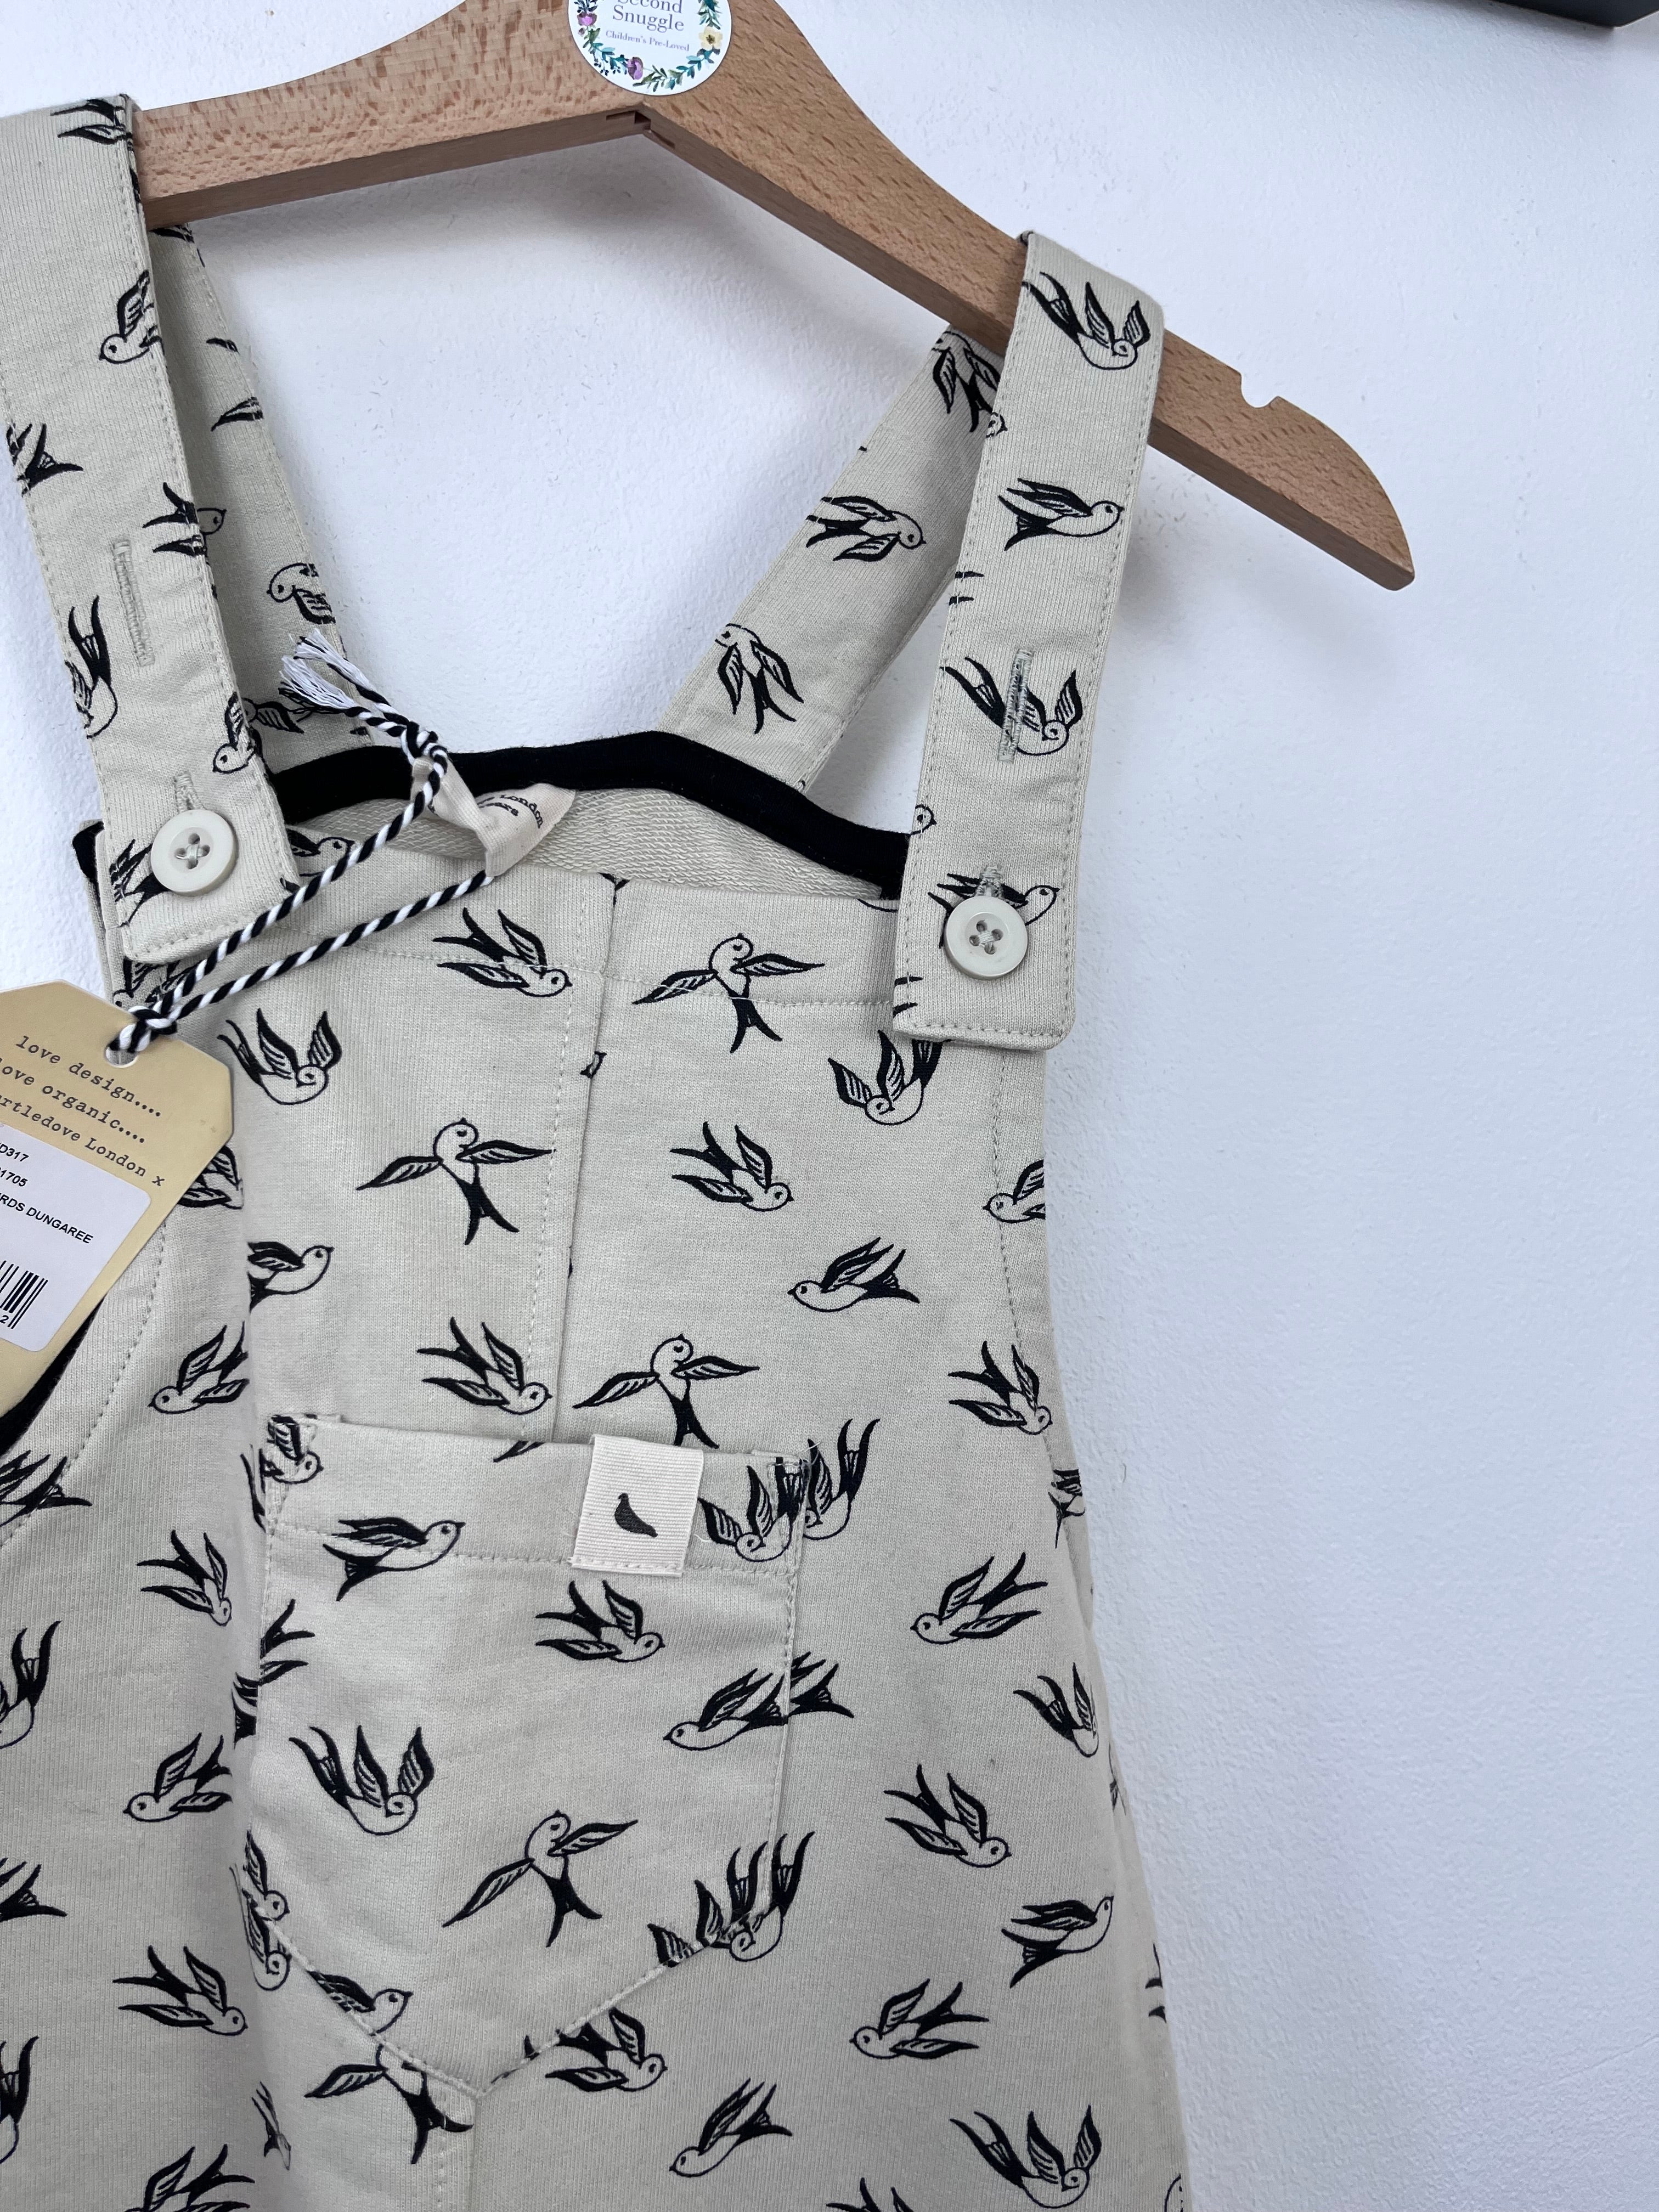 Turtledove London 4-5 Years-Dungarees-Second Snuggle Preloved